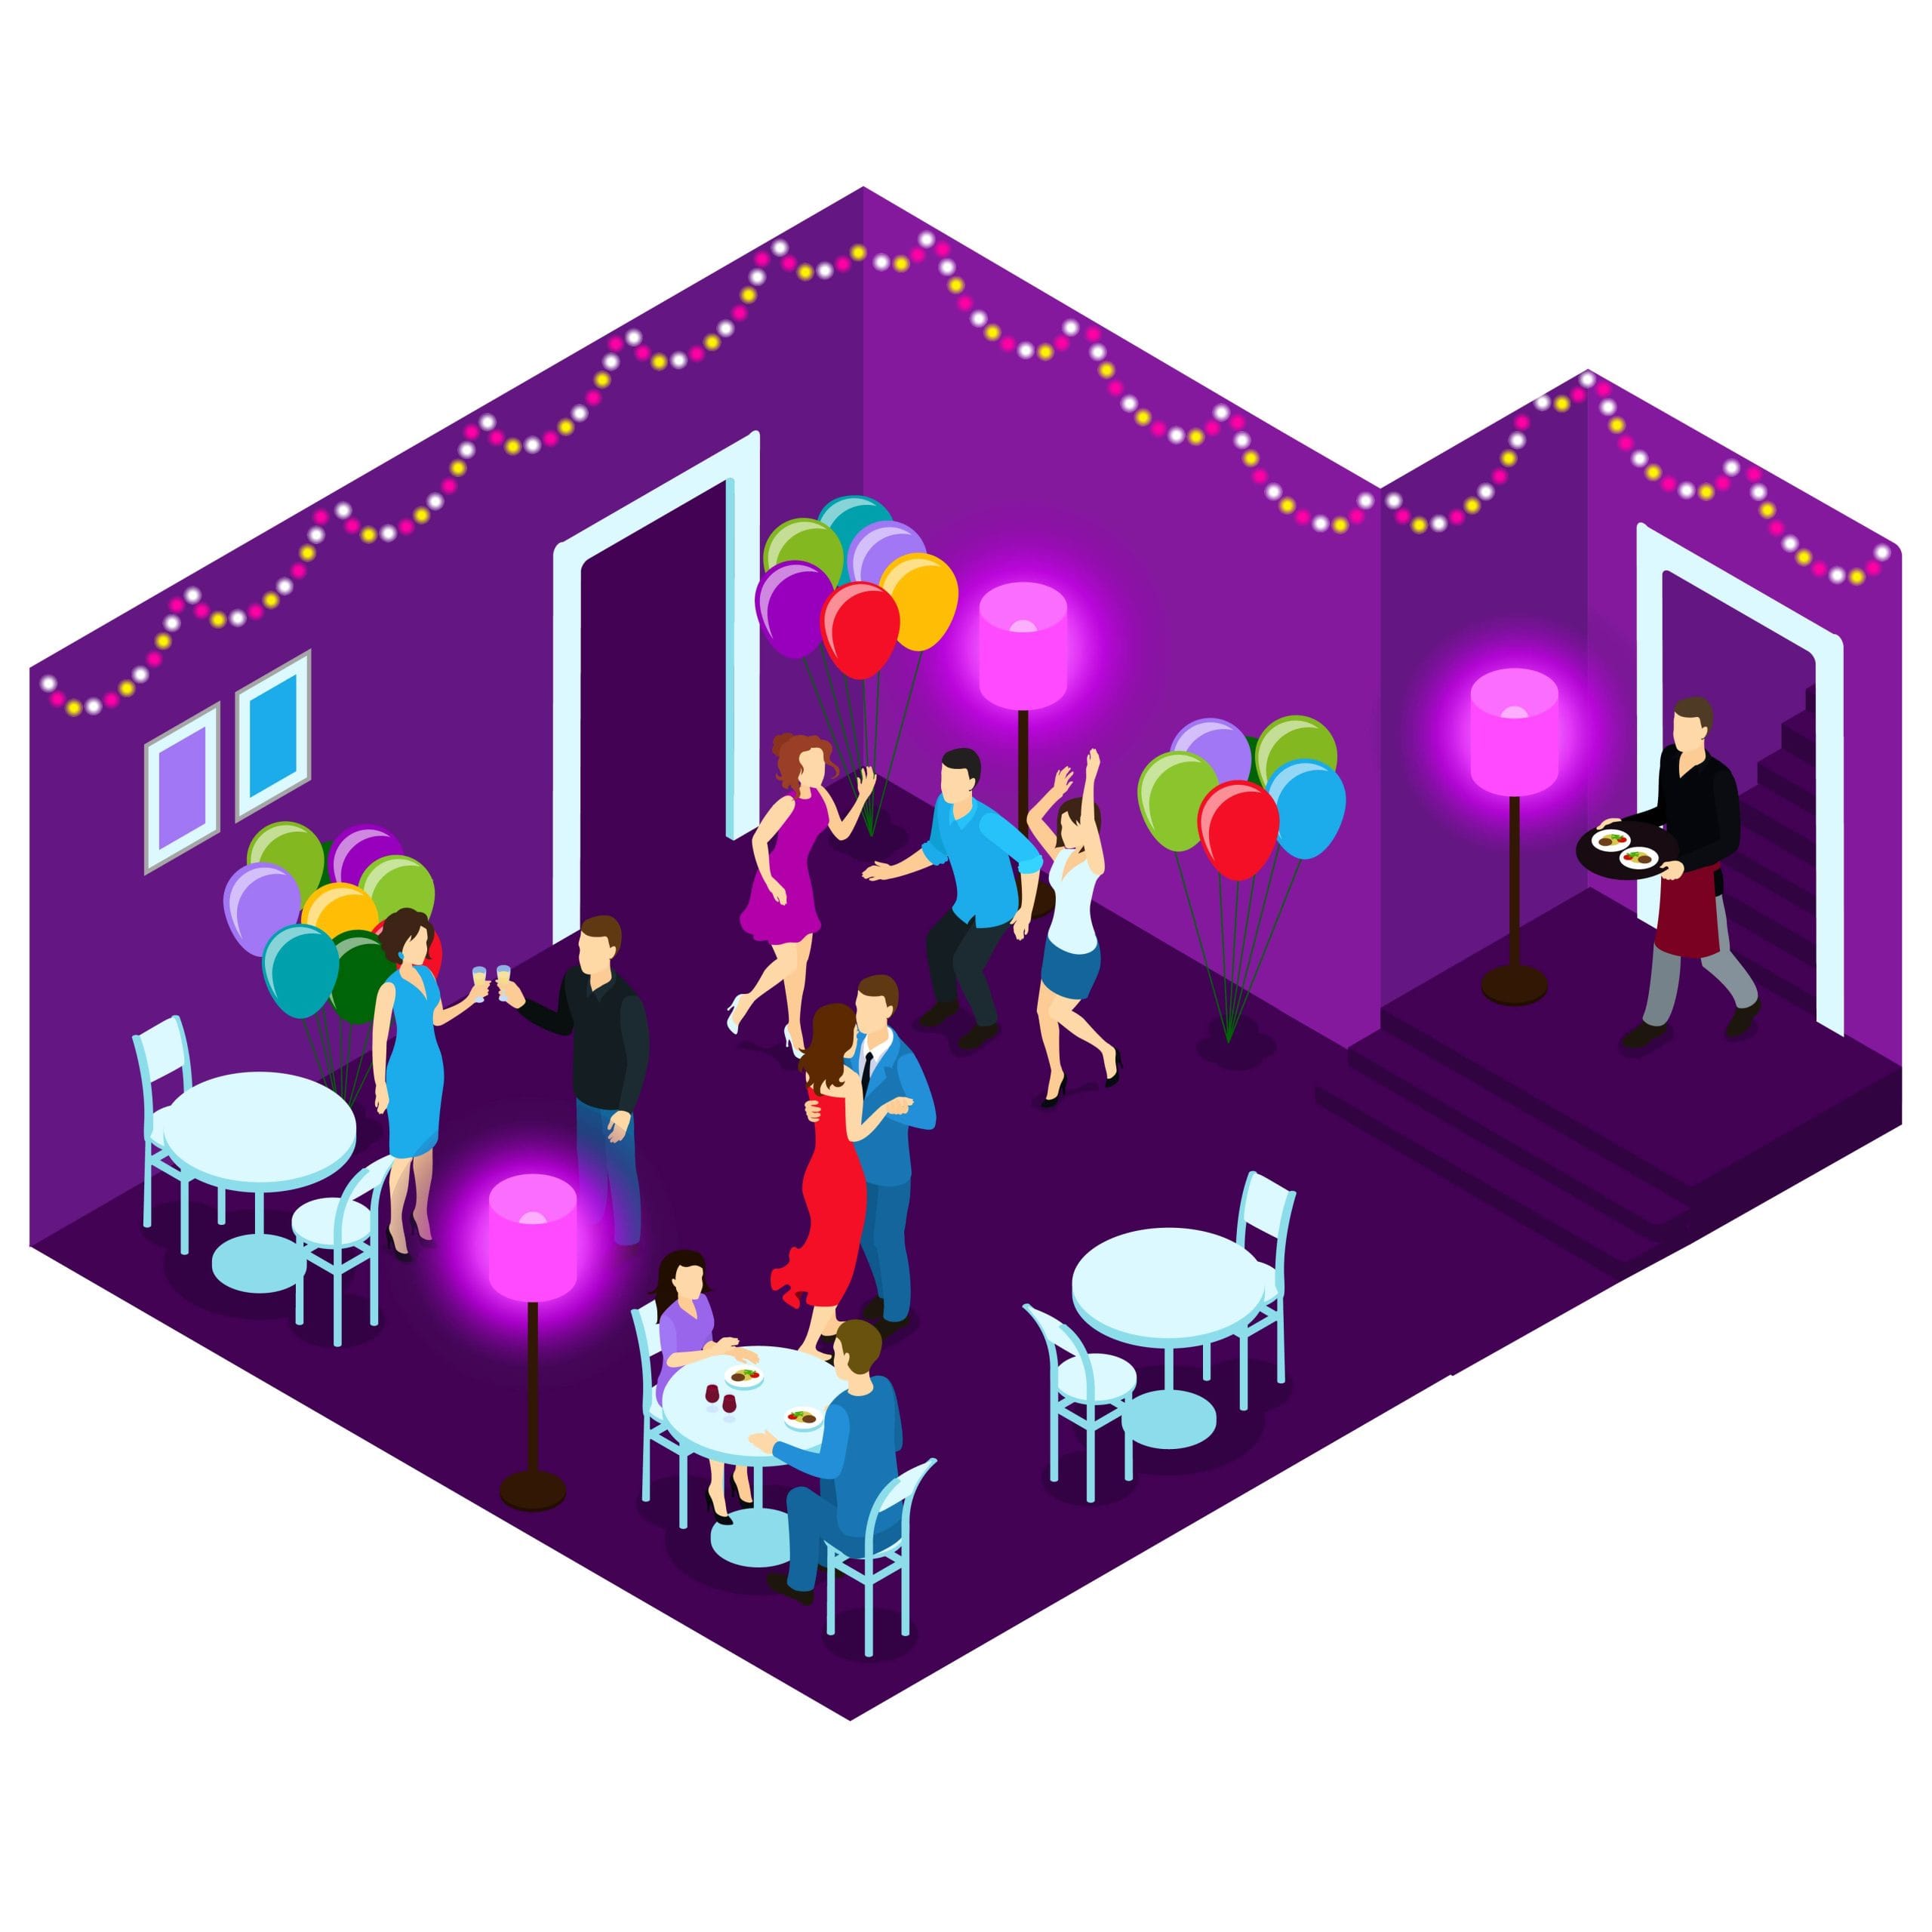 Dancing and sitting people at party in restaurant with white tables and purple walls isometric vector illustration